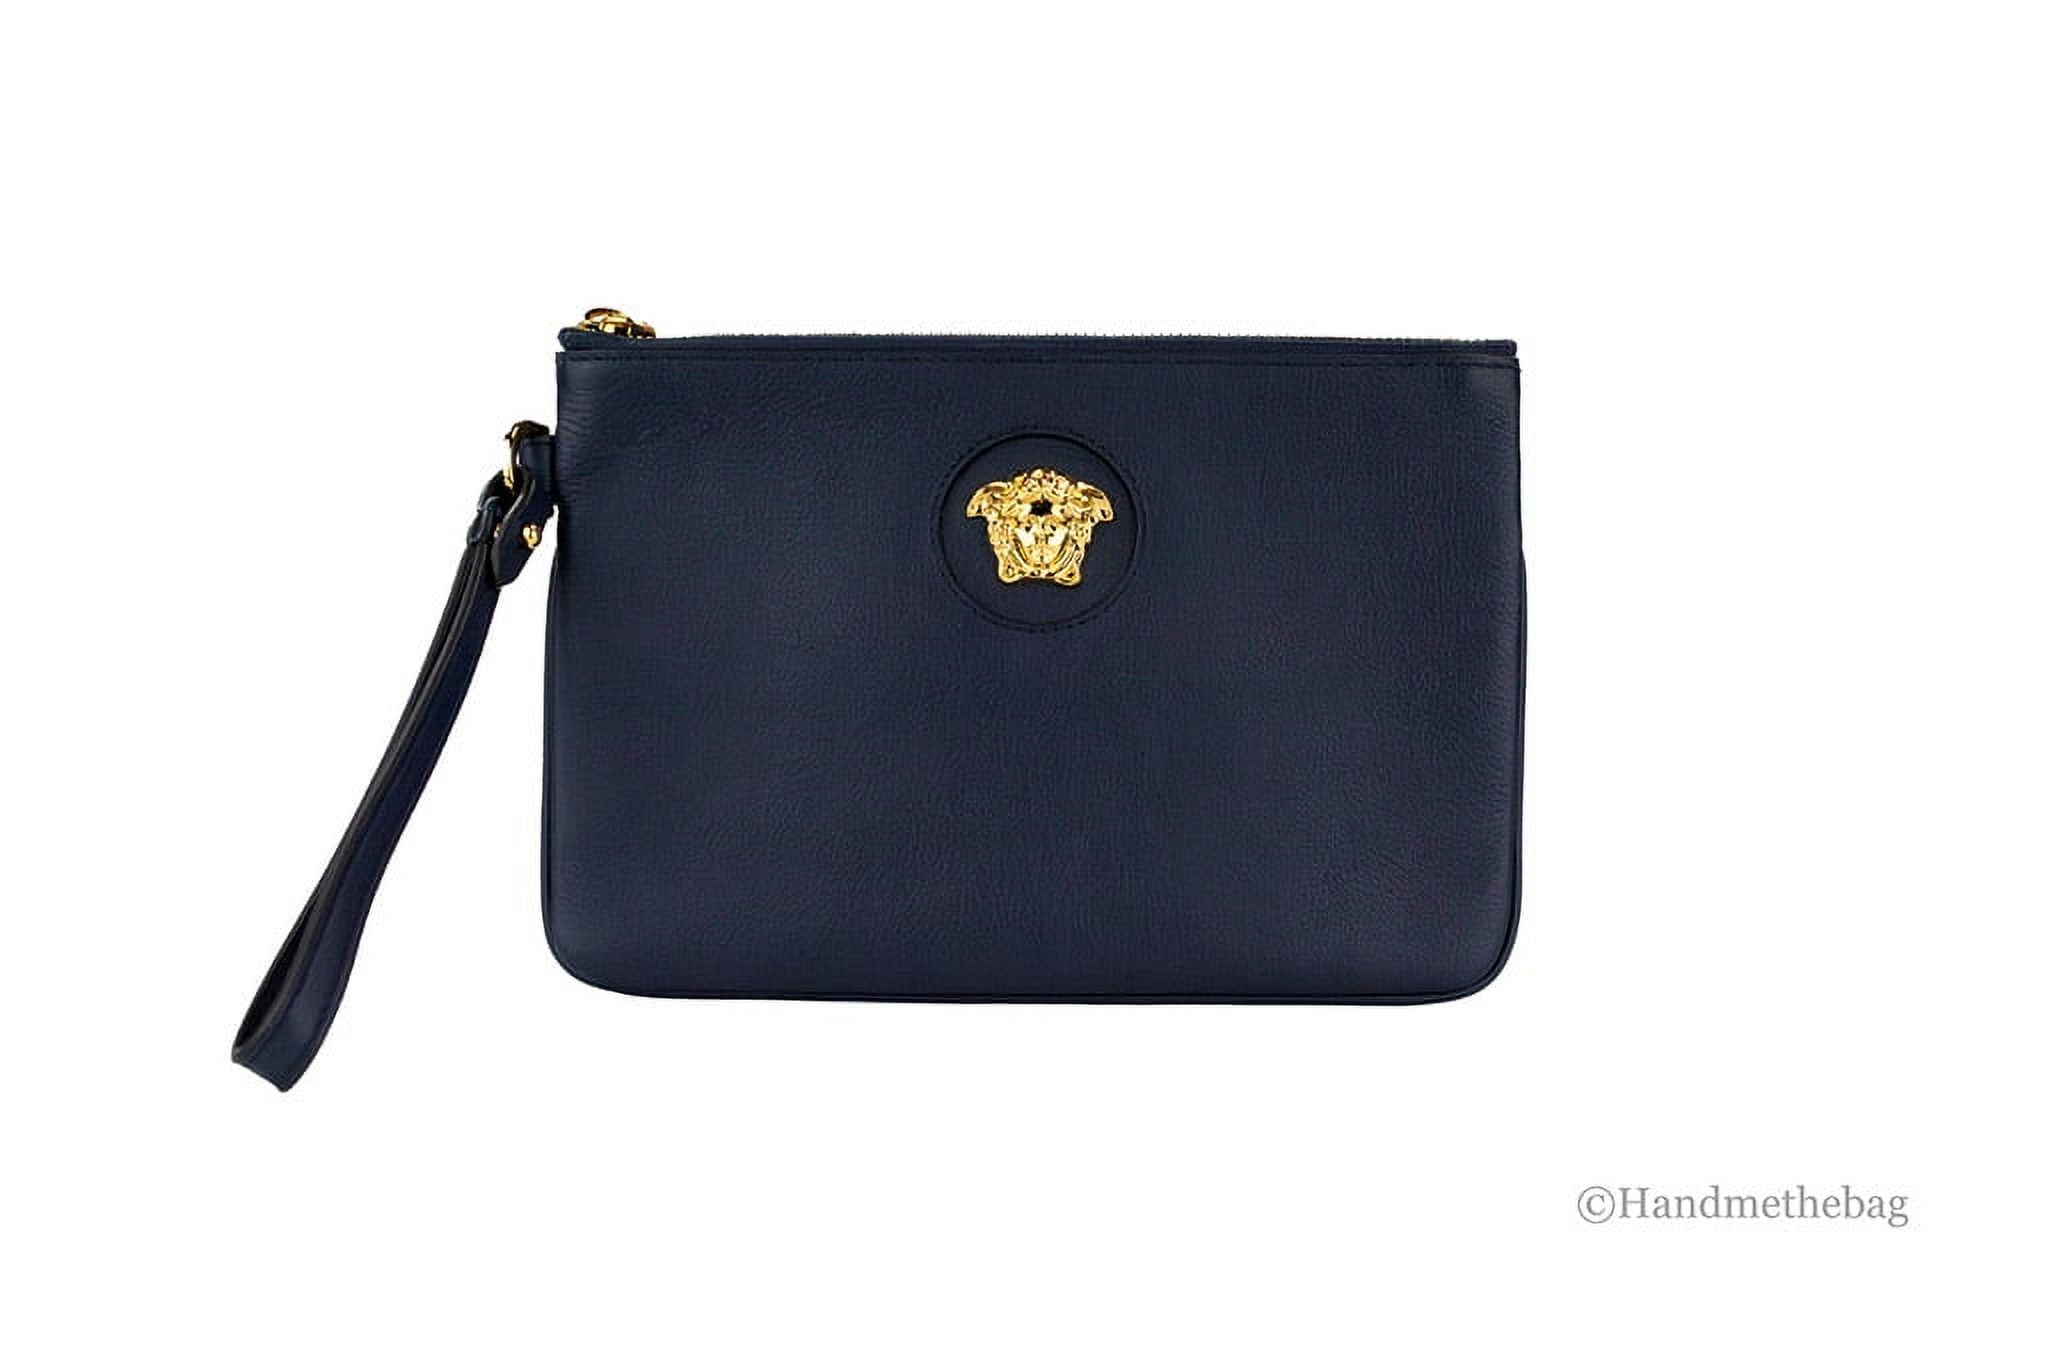 Versace Small Navy Pebbled Leather Wristlet Clutch Pouch Evening Bag dc882237 373a 4e7d 841c 33dc737b6a29.e9b5884bf0363bb43a348a2d9086dd69